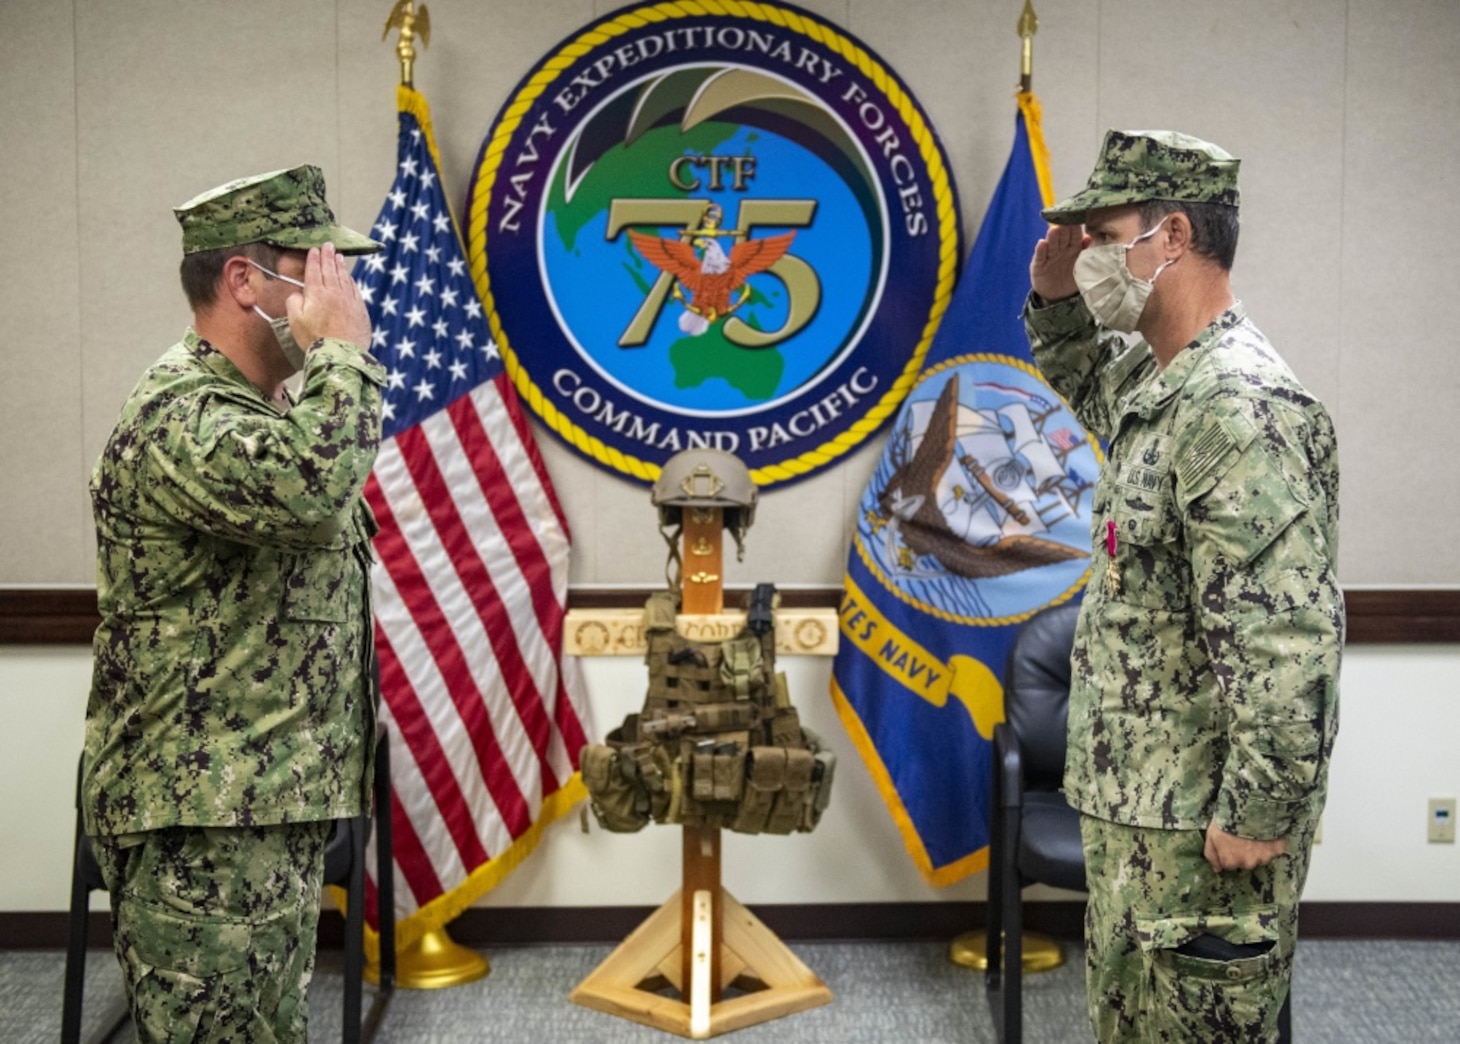 SANTA RITA, Guam (Oct. 2, 2020) Capt. Eric Correll, right, salutes Capt. Gareth Healy, as he is properly relieved of command of Navy Expeditionary Forces Command Pacific-Task Force (CTF) 75 during a change of command ceremony held at the headquarters building in Camp Covington on Naval Base Guam. CTF 75 is 7th Fleet's primary expeditionary task force and is responsible for the planning and execution of maritime security operations, explosive ordnance disposal, diving, engineering and construction, and underwater construction. It additionally provides direct support to diving and salvage operations and expeditionary intelligence throughout the Indo-Asia-Pacific region.